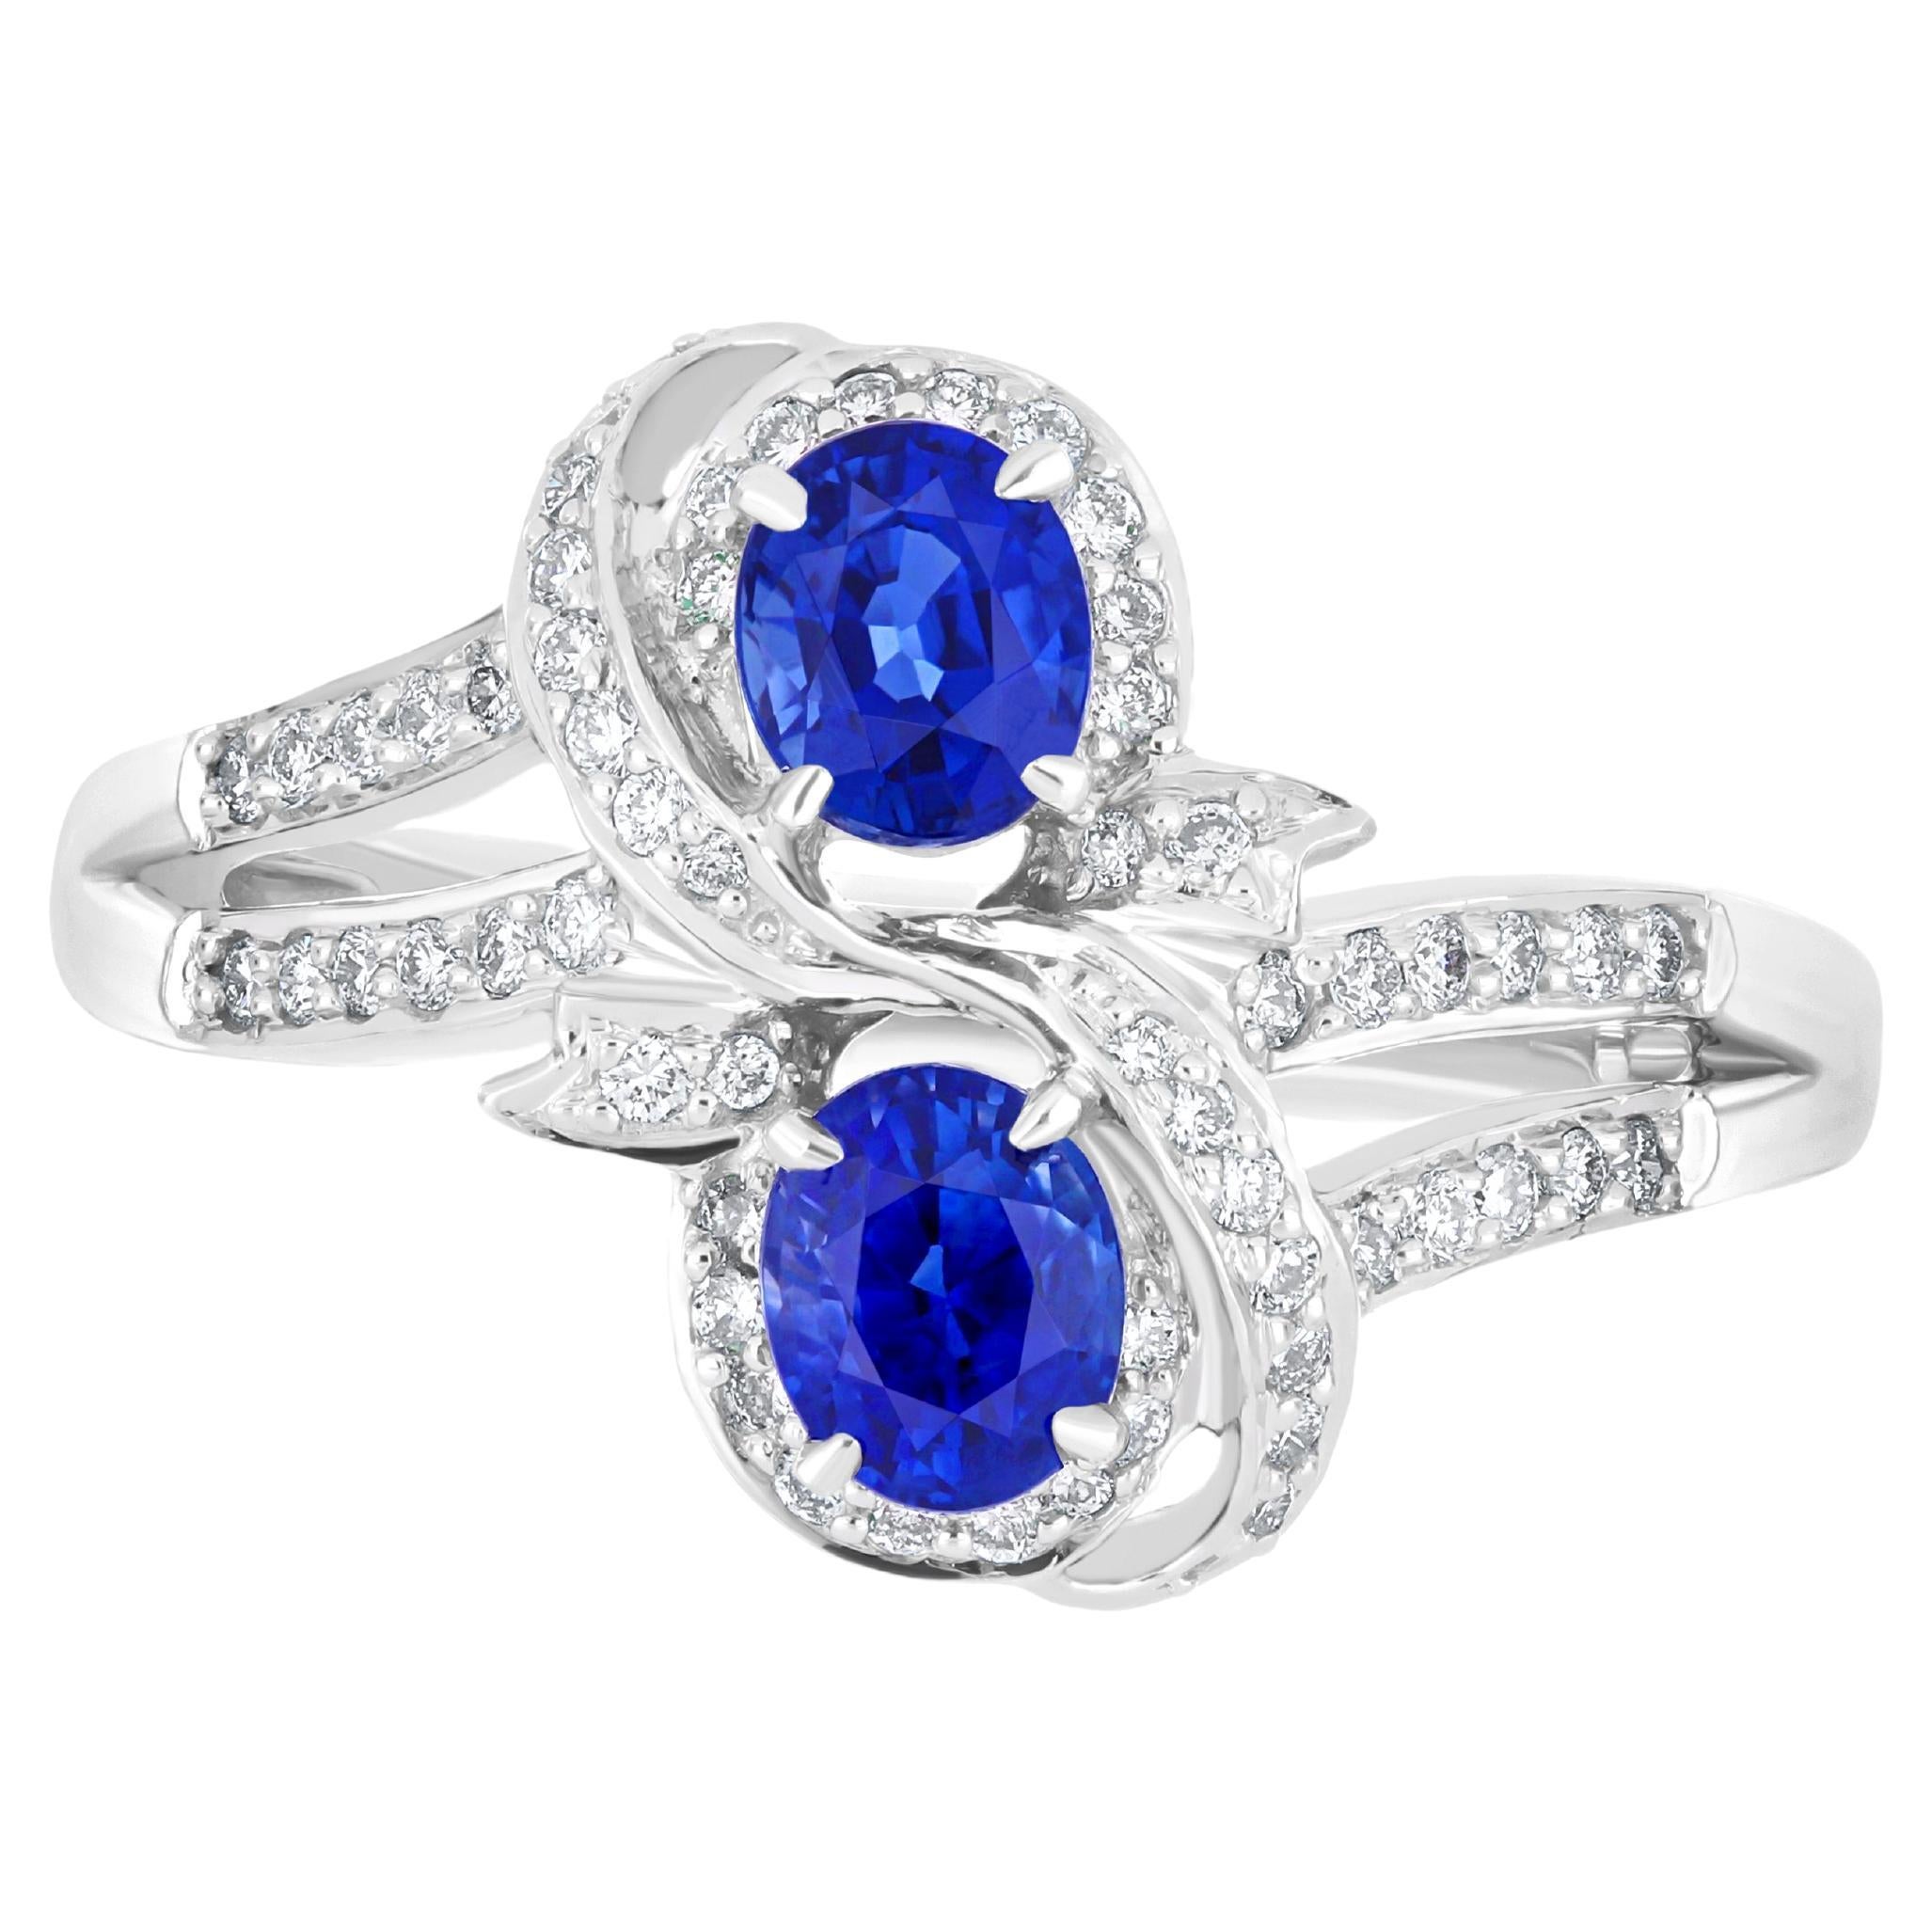 Blue Sapphire and Dimond Ring 18 Karat White Gold for Wedding Wear Jewelry